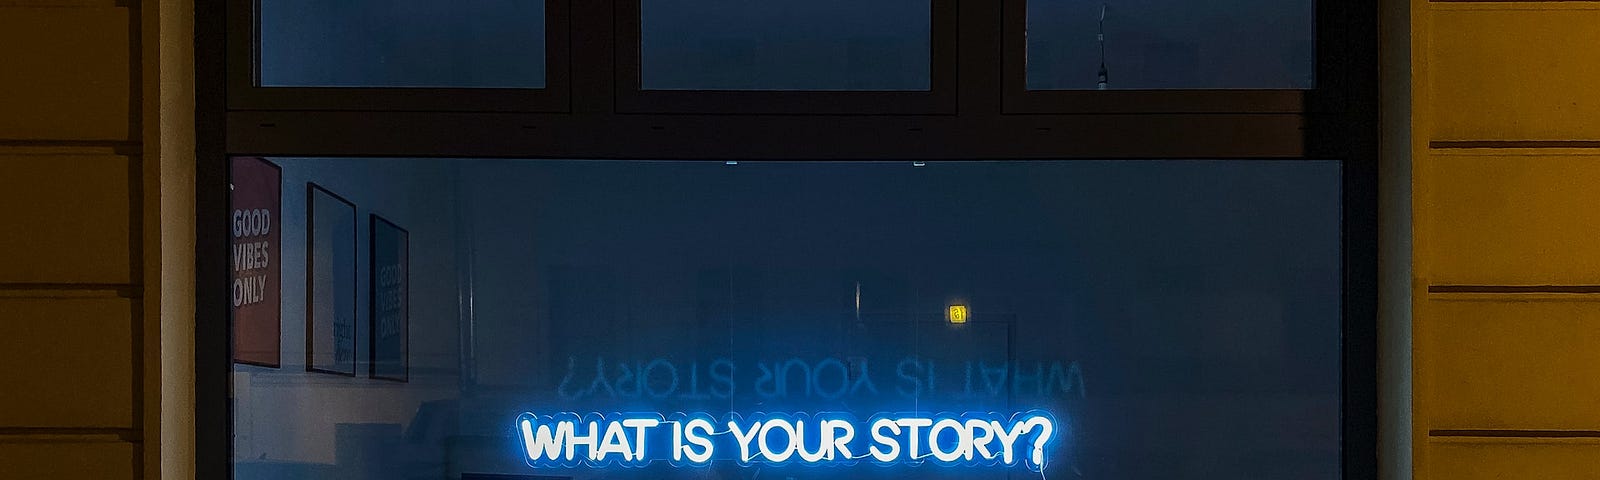 An exterior view of a structure with a large window peeking into an unlit modern office. A neon sign in the window reads: WHAT IS YOUR STORY?